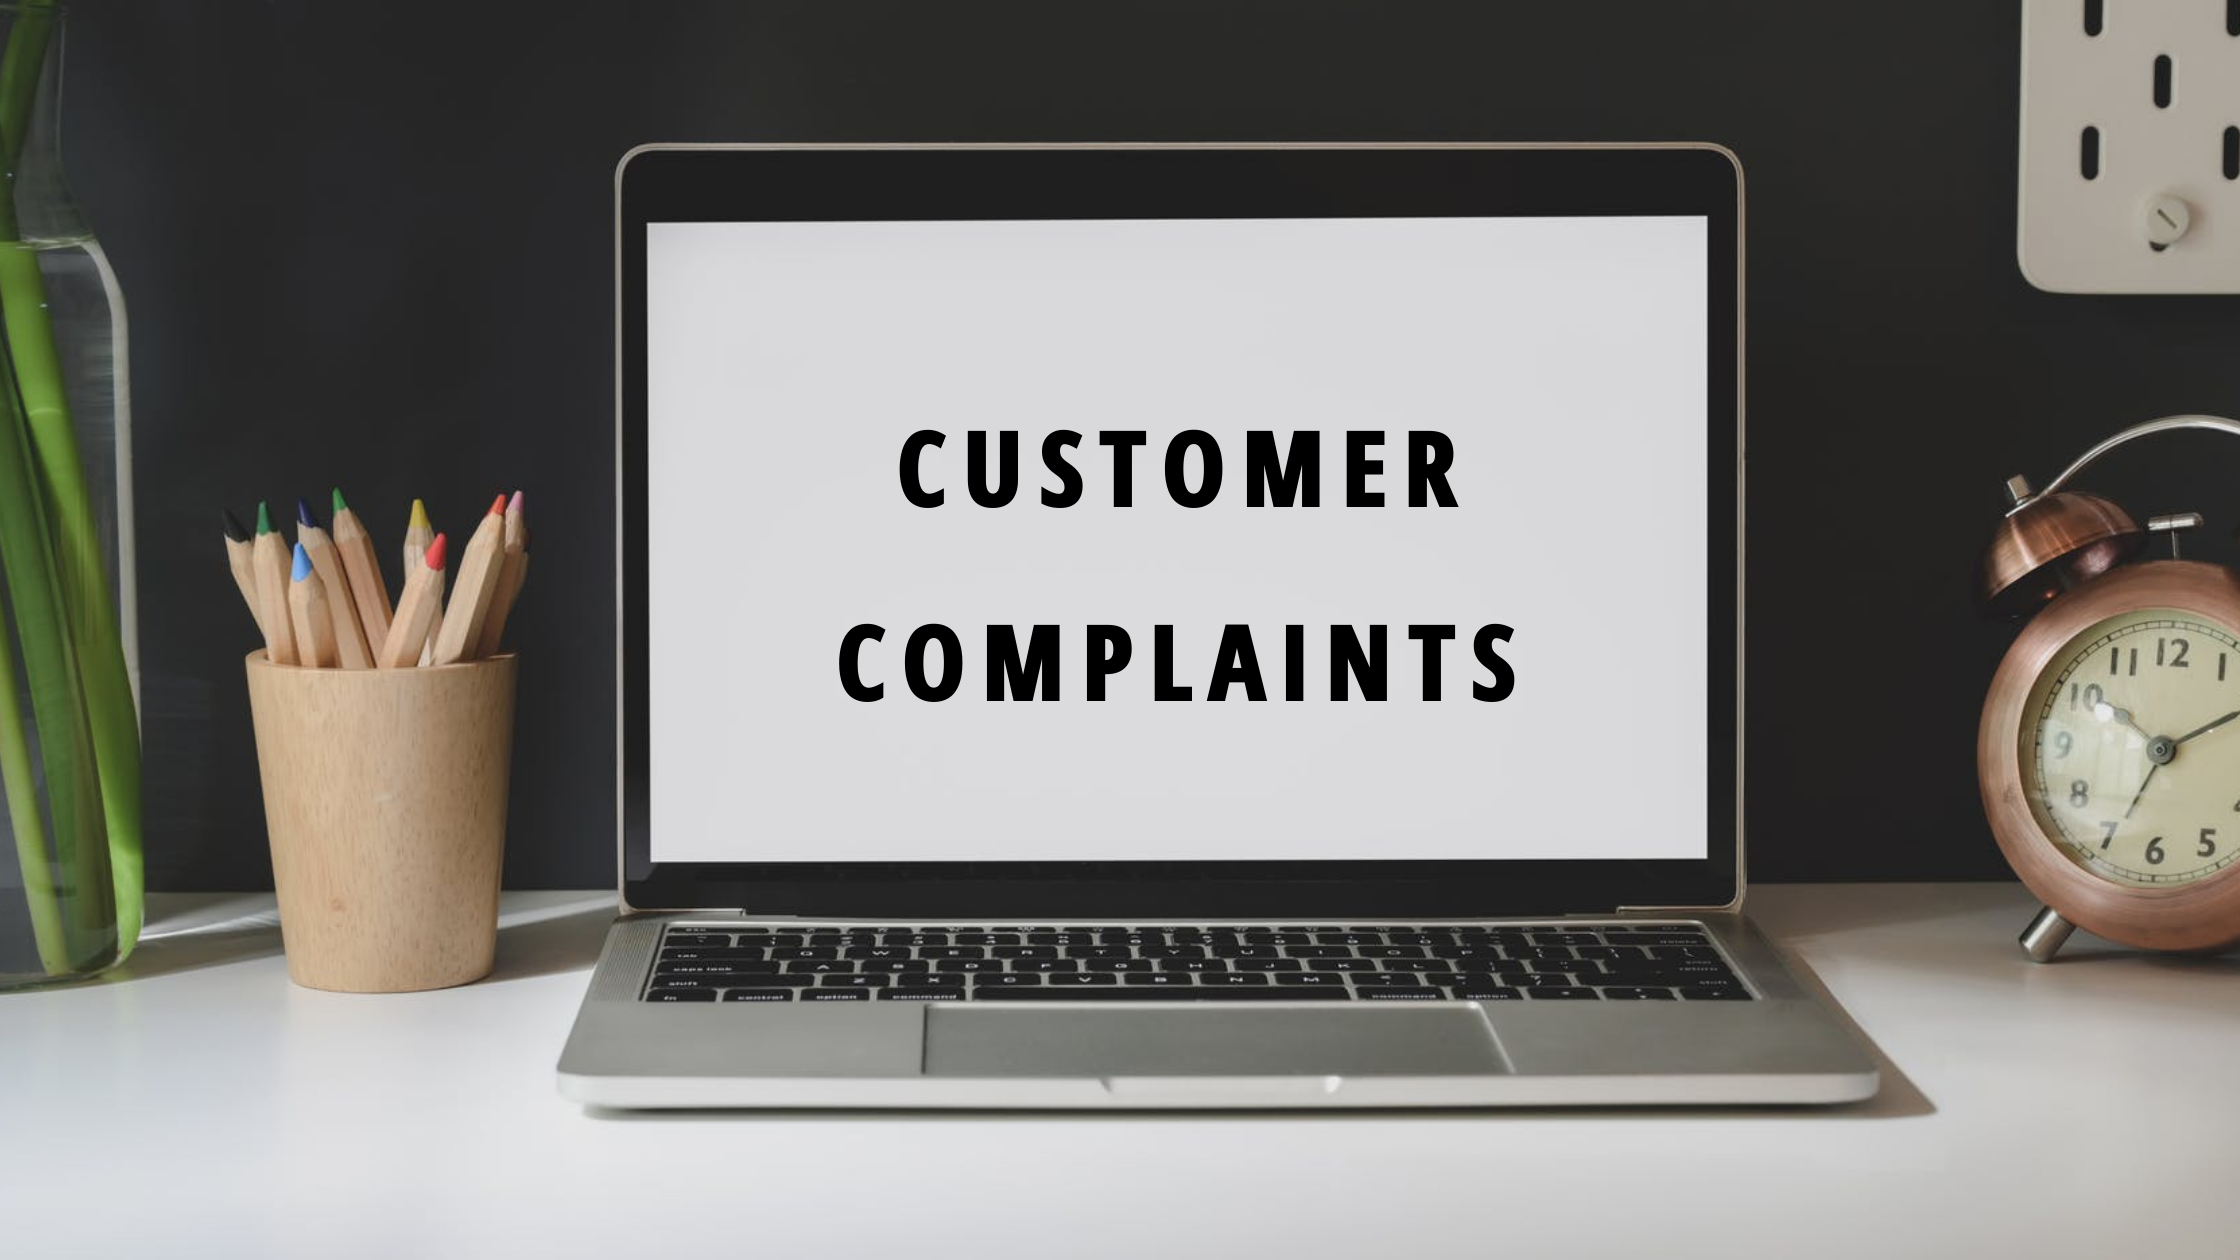 CUSTOMER COMPLAINTS,customer dissatisfaction,Client criticism, customer administration experience